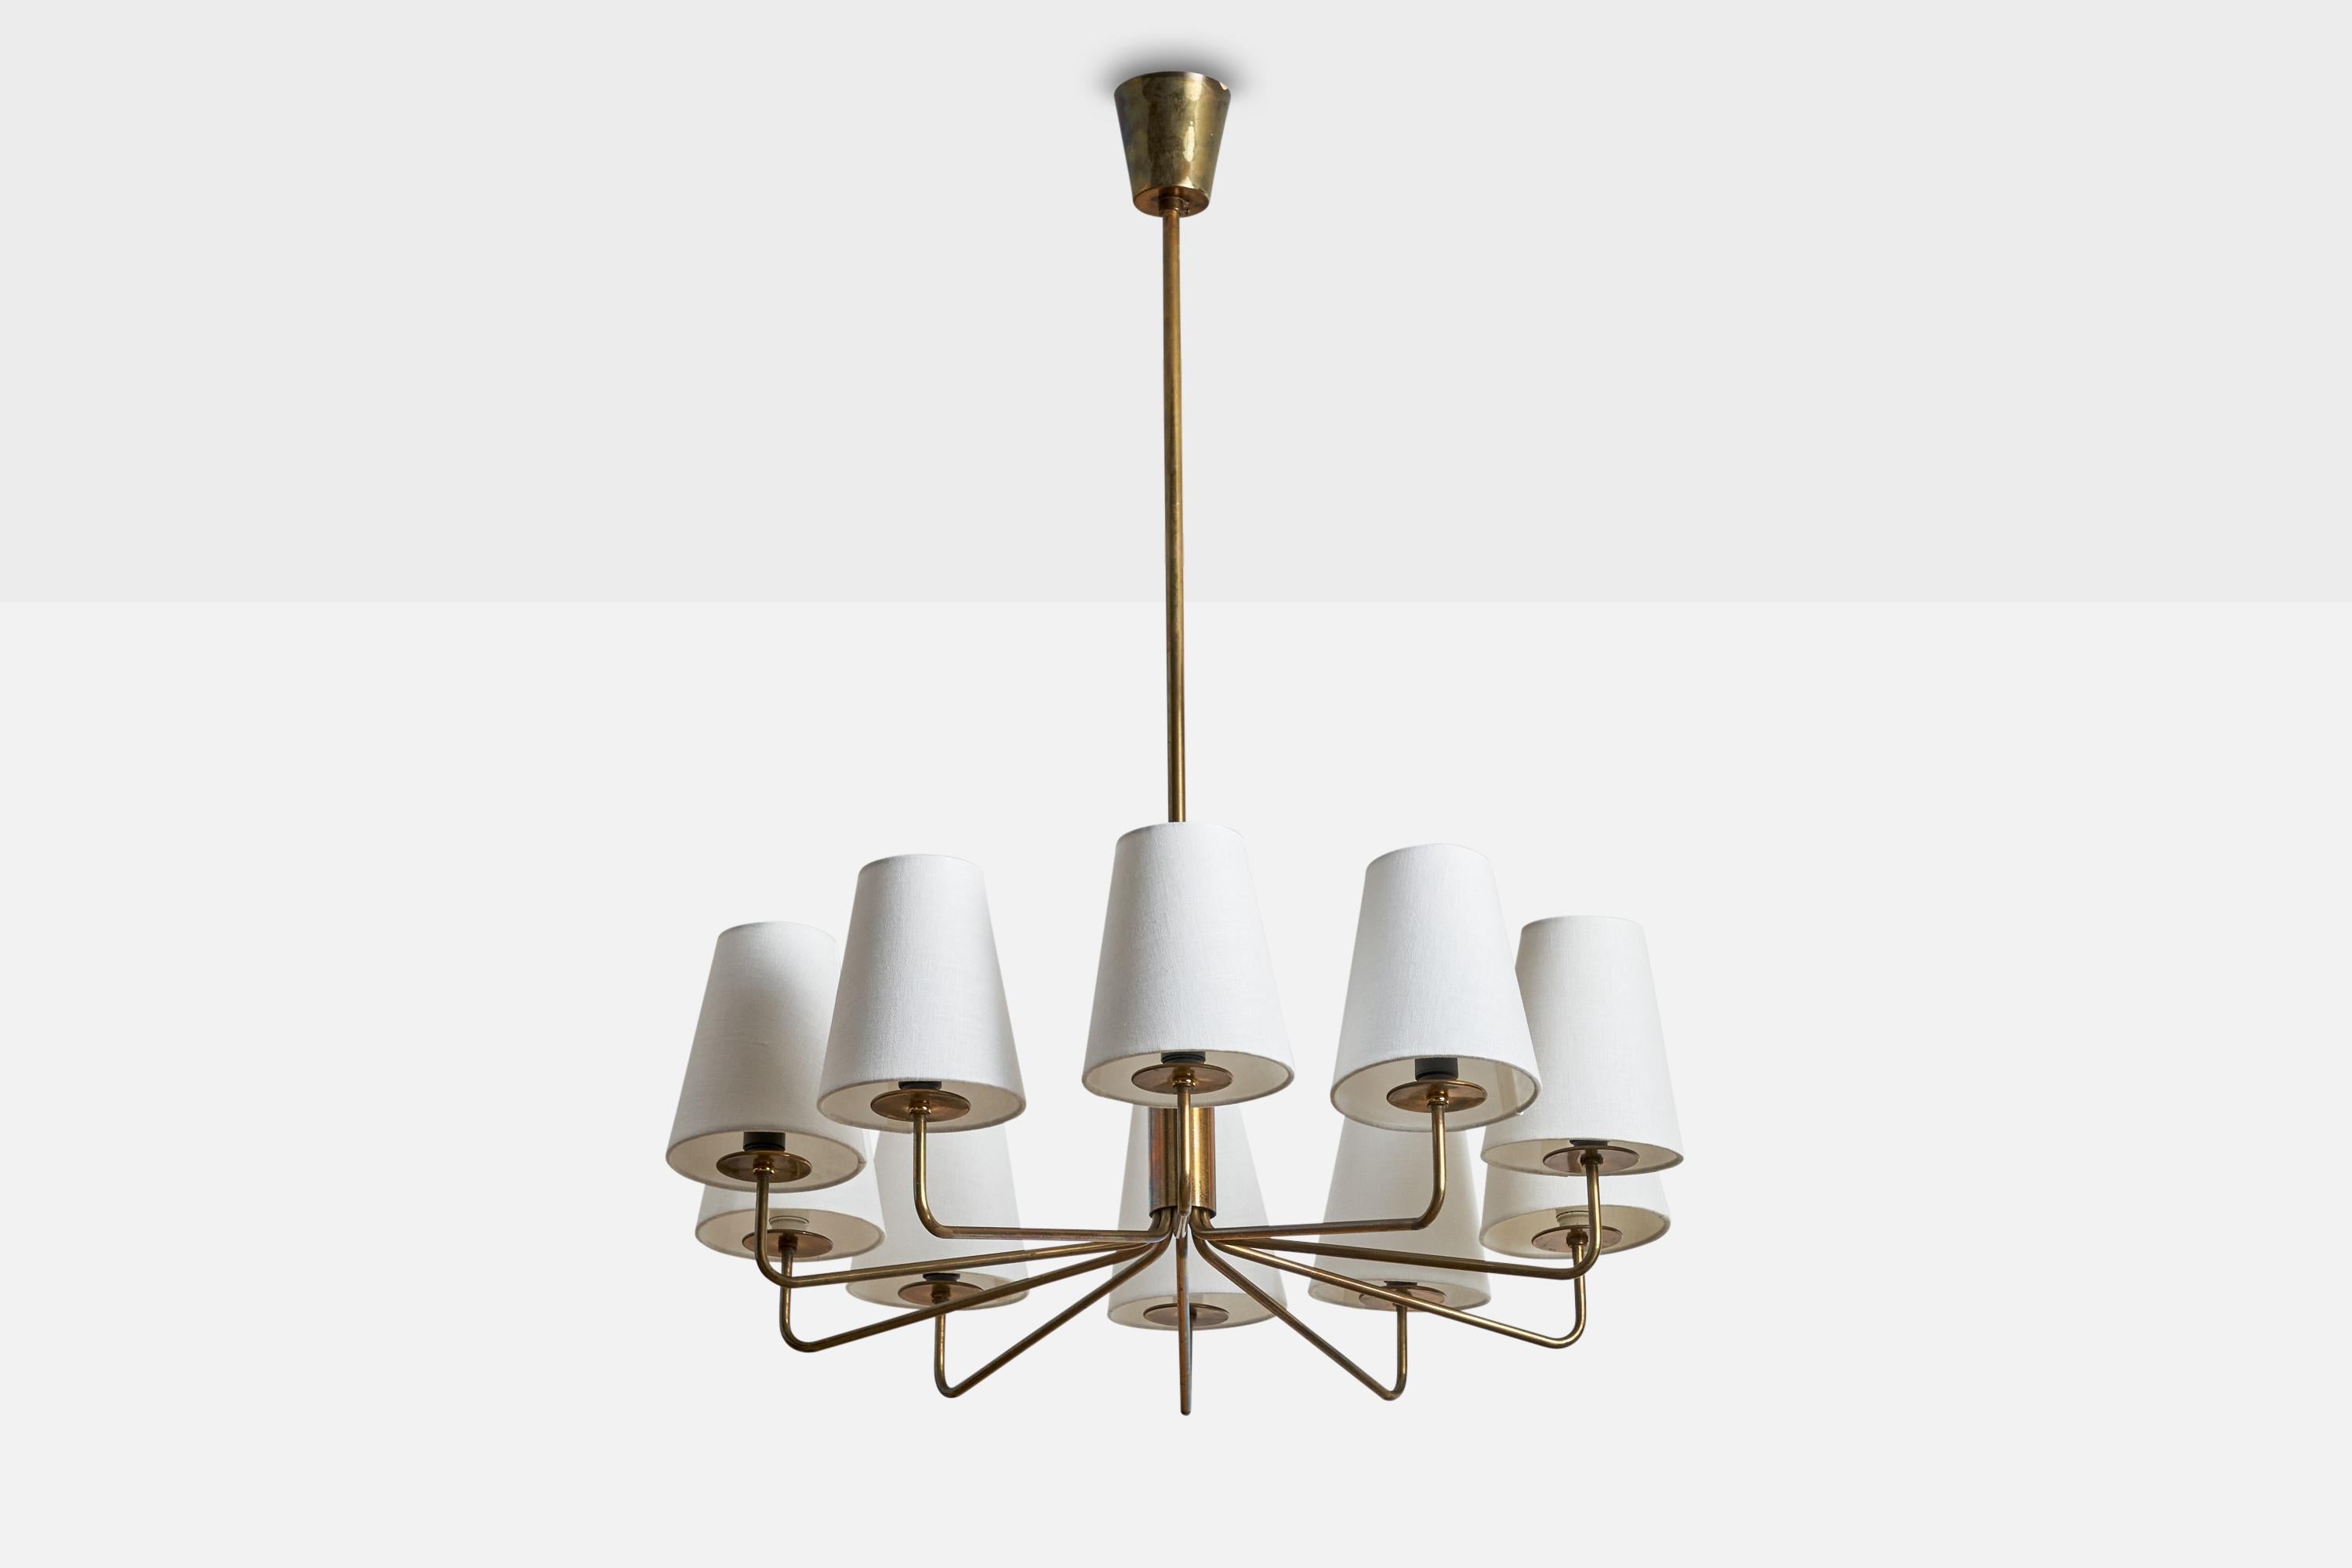 A brass and fabric chandelier designed and produced in Sweden, c. 1940s.

Dimensions of canopy (inches): 3.25” H x 3.25 Diameter
Socket takes standard E-14 bulbs. 10 sockets.There is no maximum wattage stated on the fixture. All lighting will be